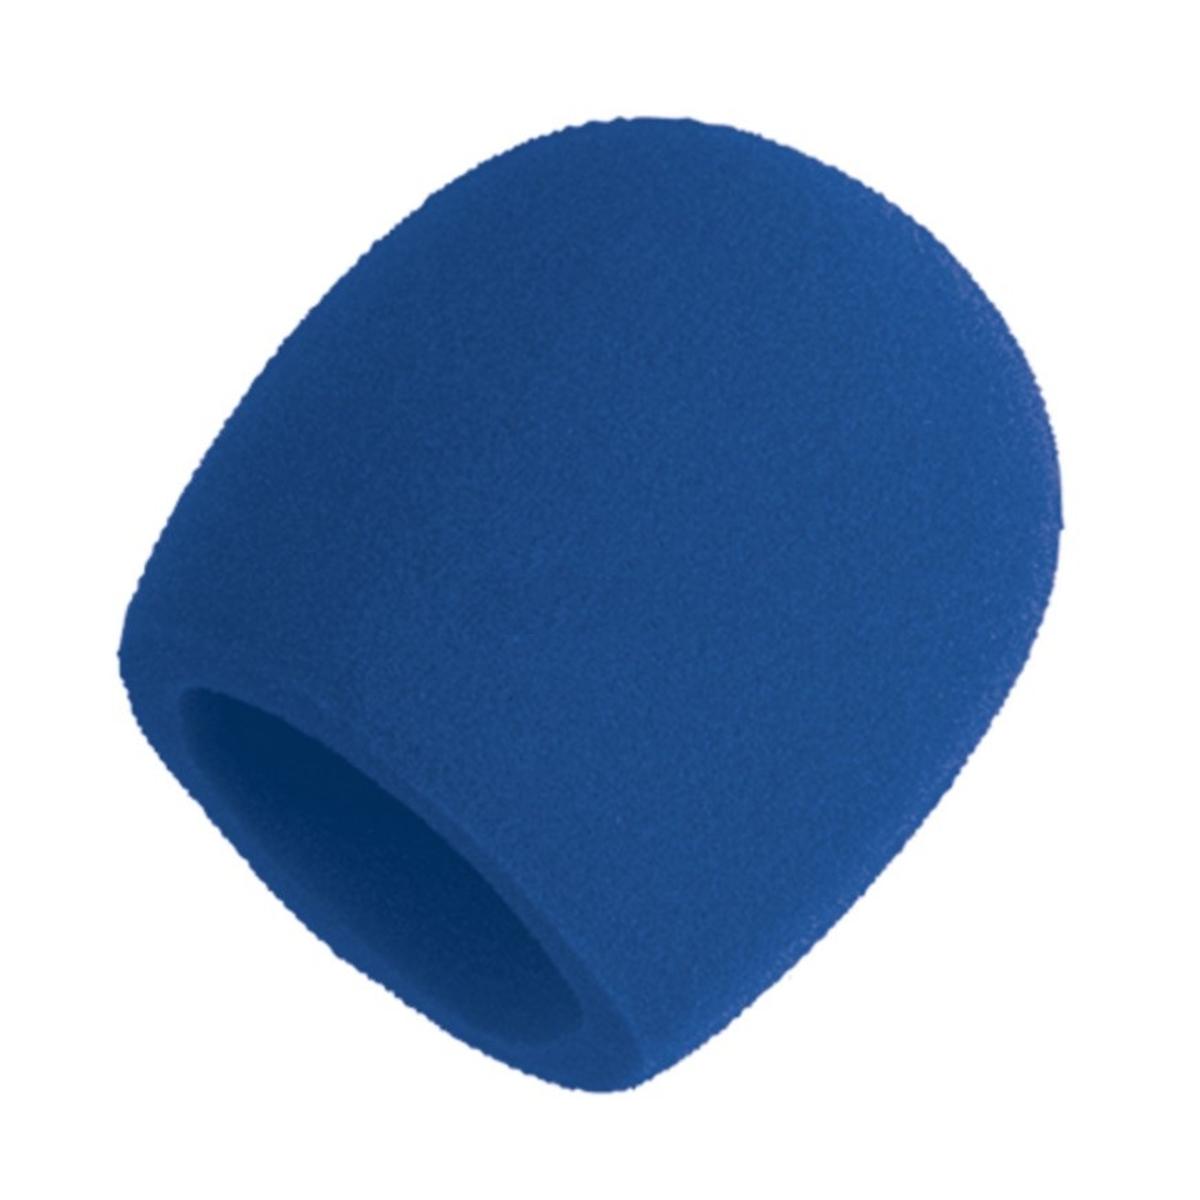 Shure A58WS Windscreen for SM58 & Other Ball Microphones - Blue